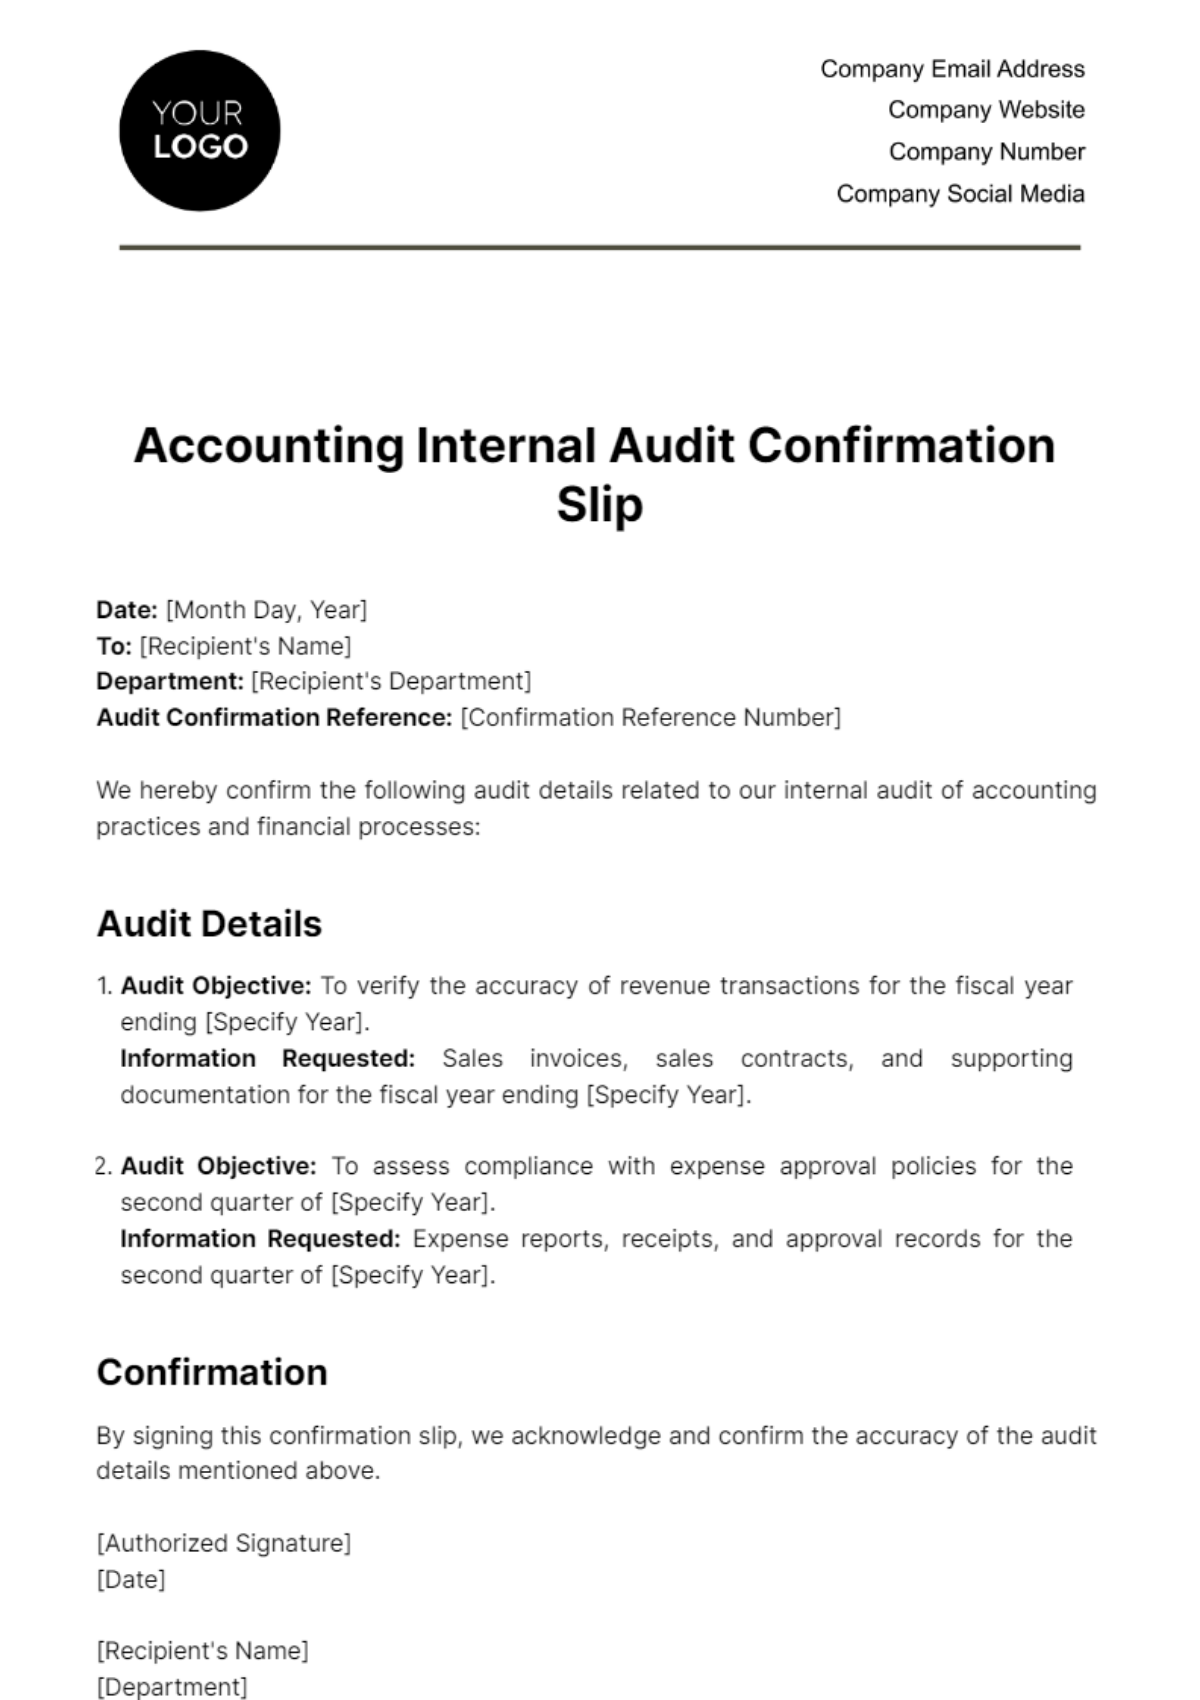 Free Accounting Internal Audit Confirmation Slip Template